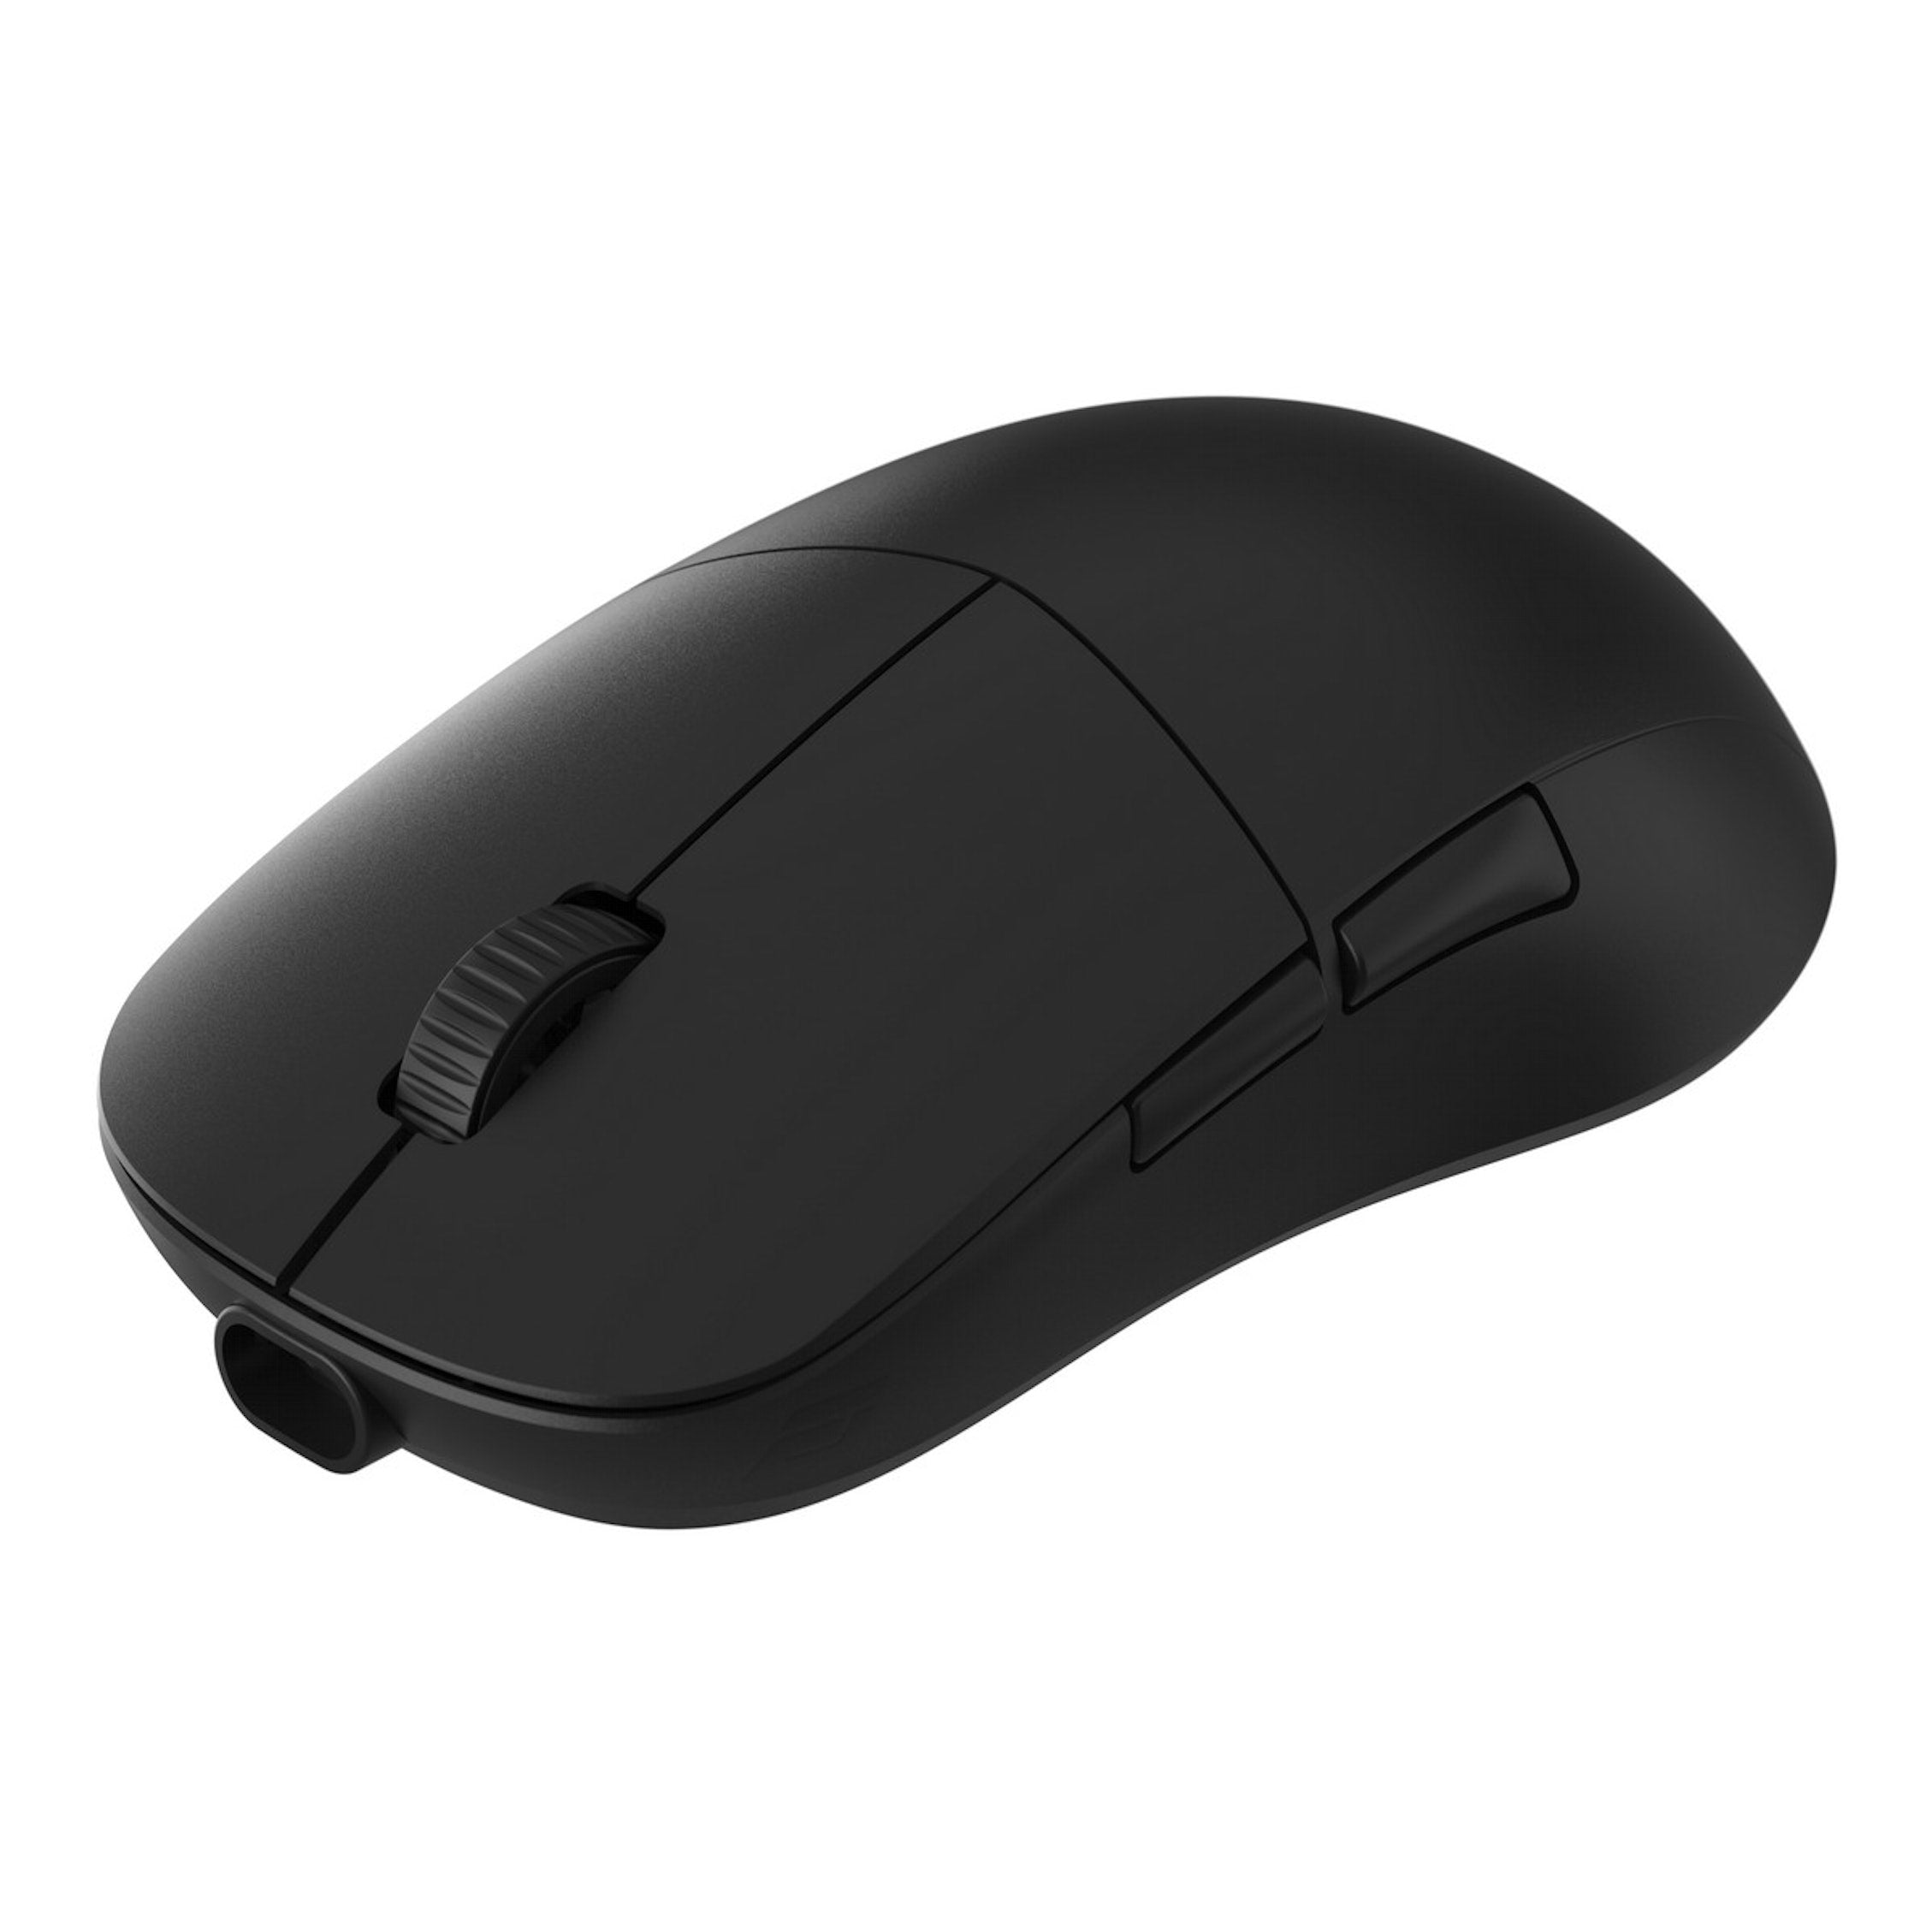 Endgame Gear XM2w Wireless Gaming Mouse - Black - us